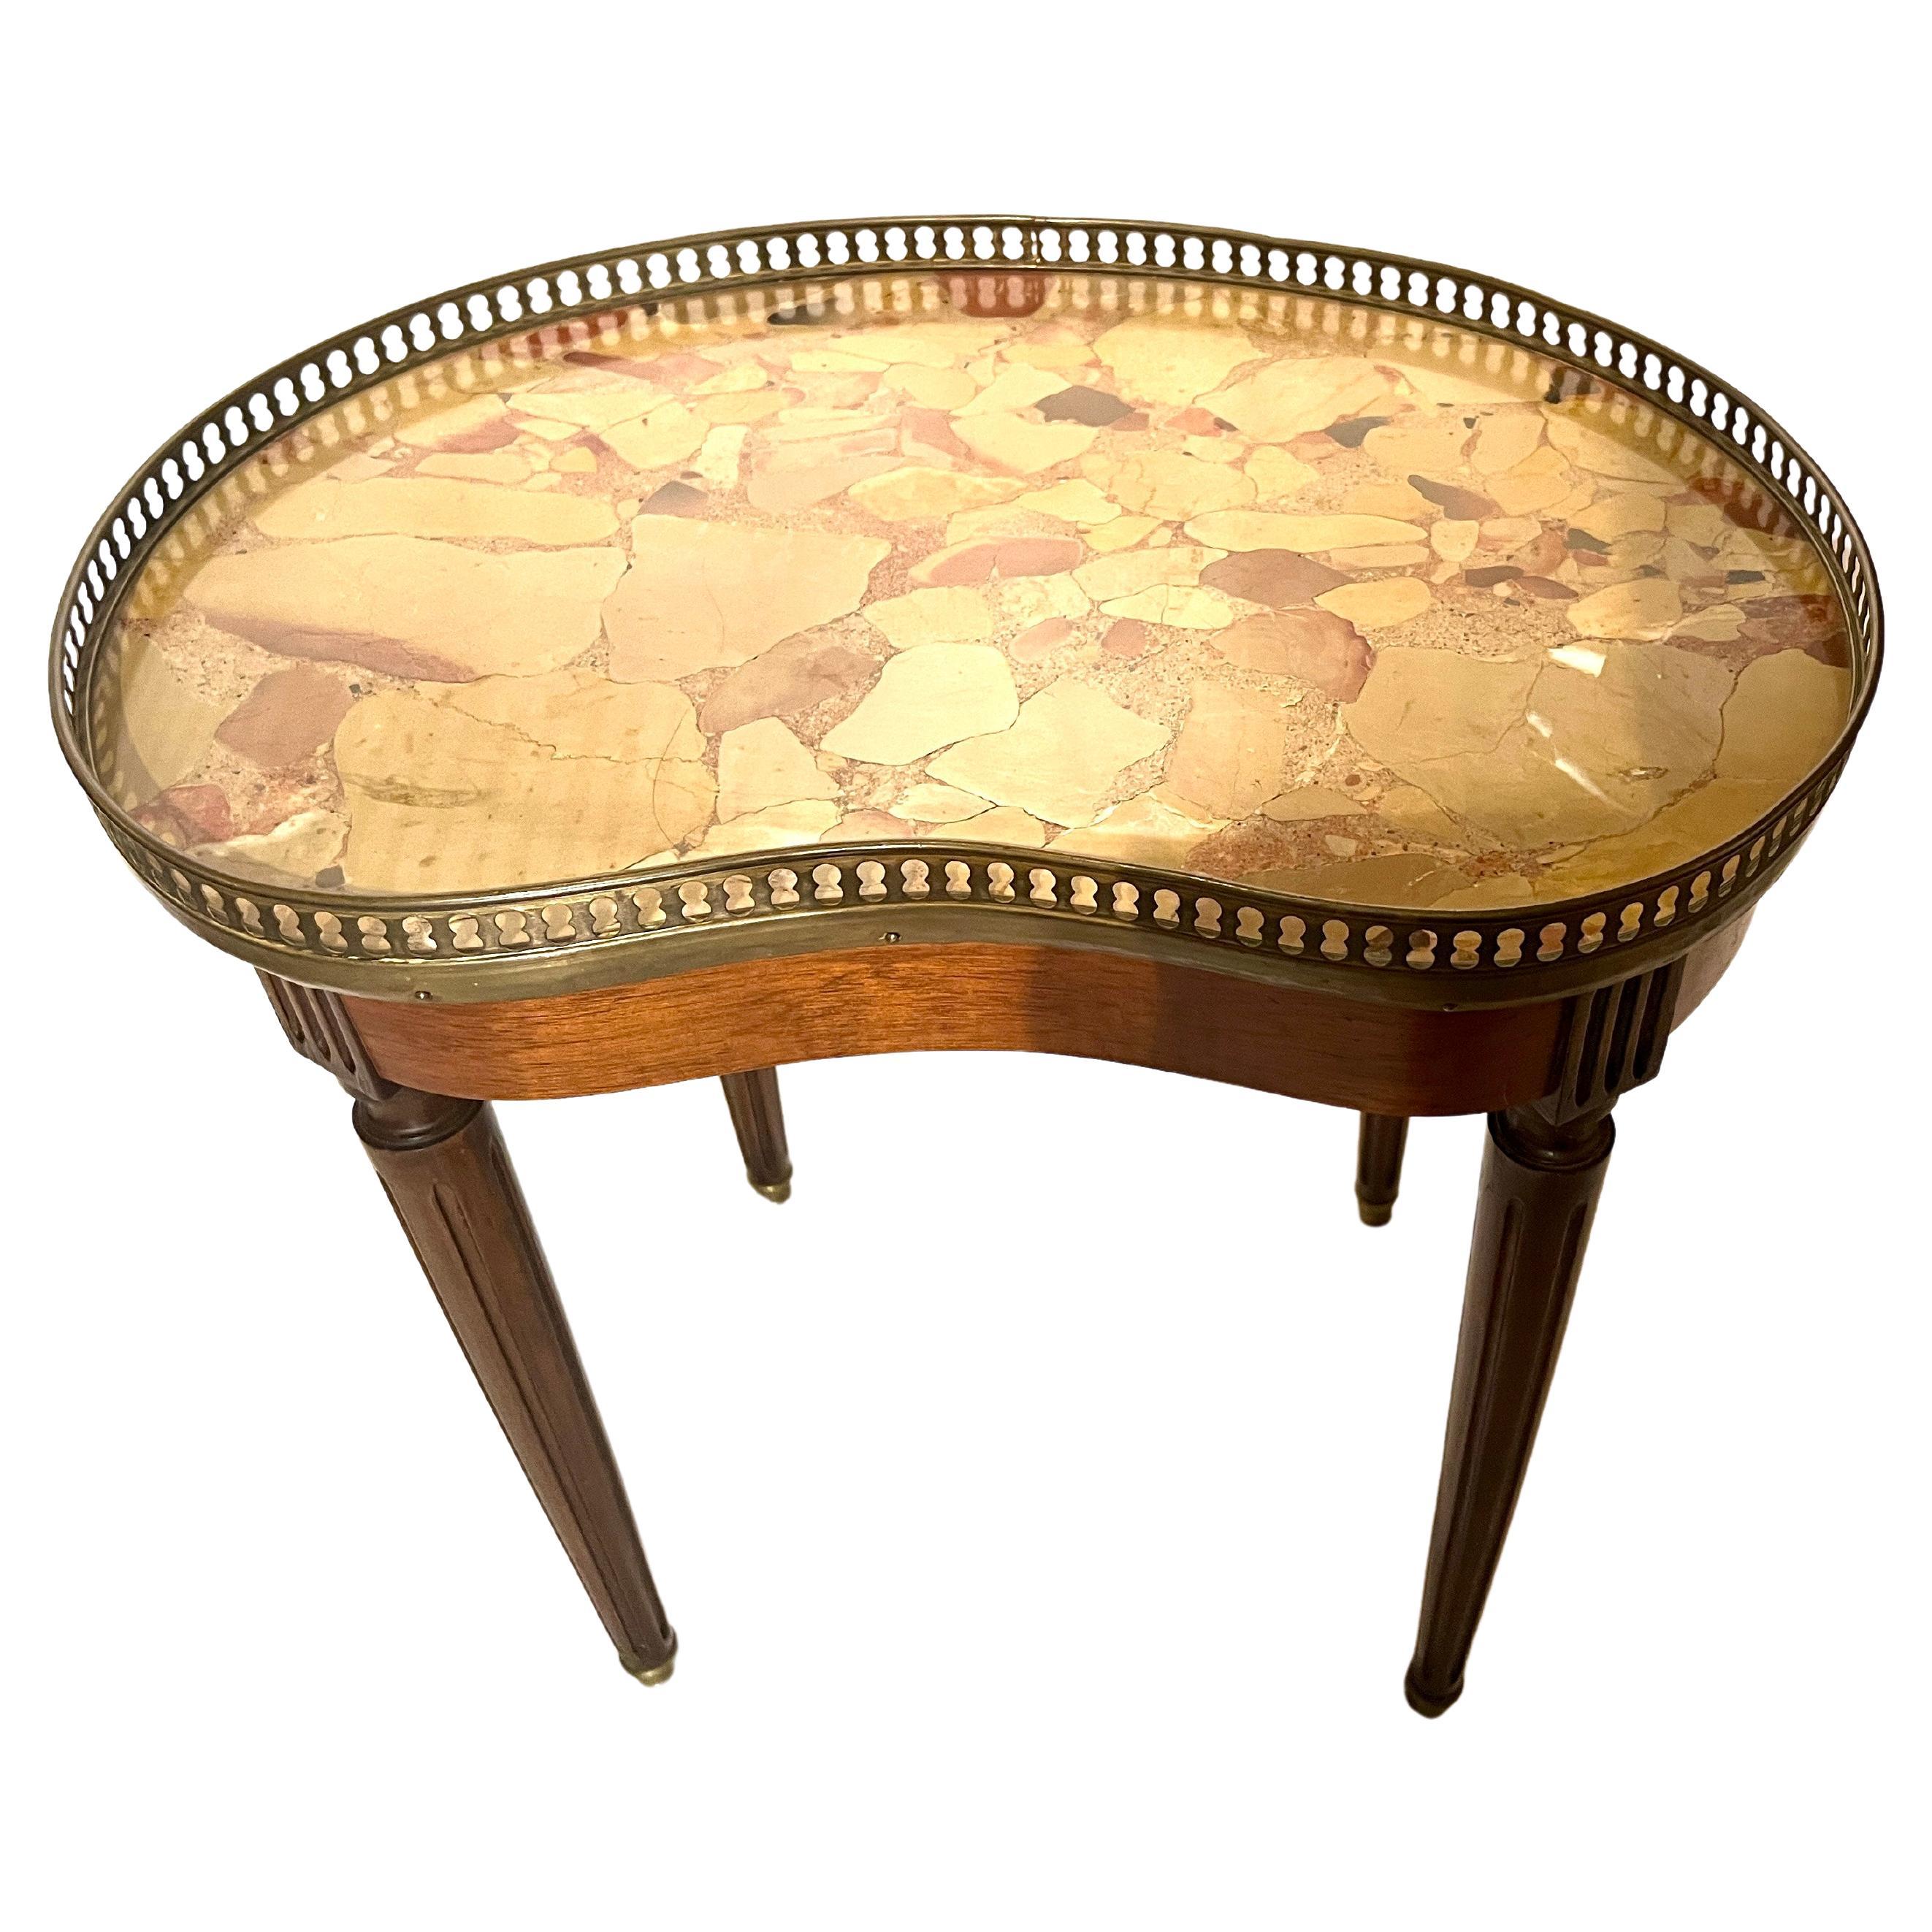 Antique French Marble Top Kidney Shaped Table, Circa 1910-1920. For Sale 1